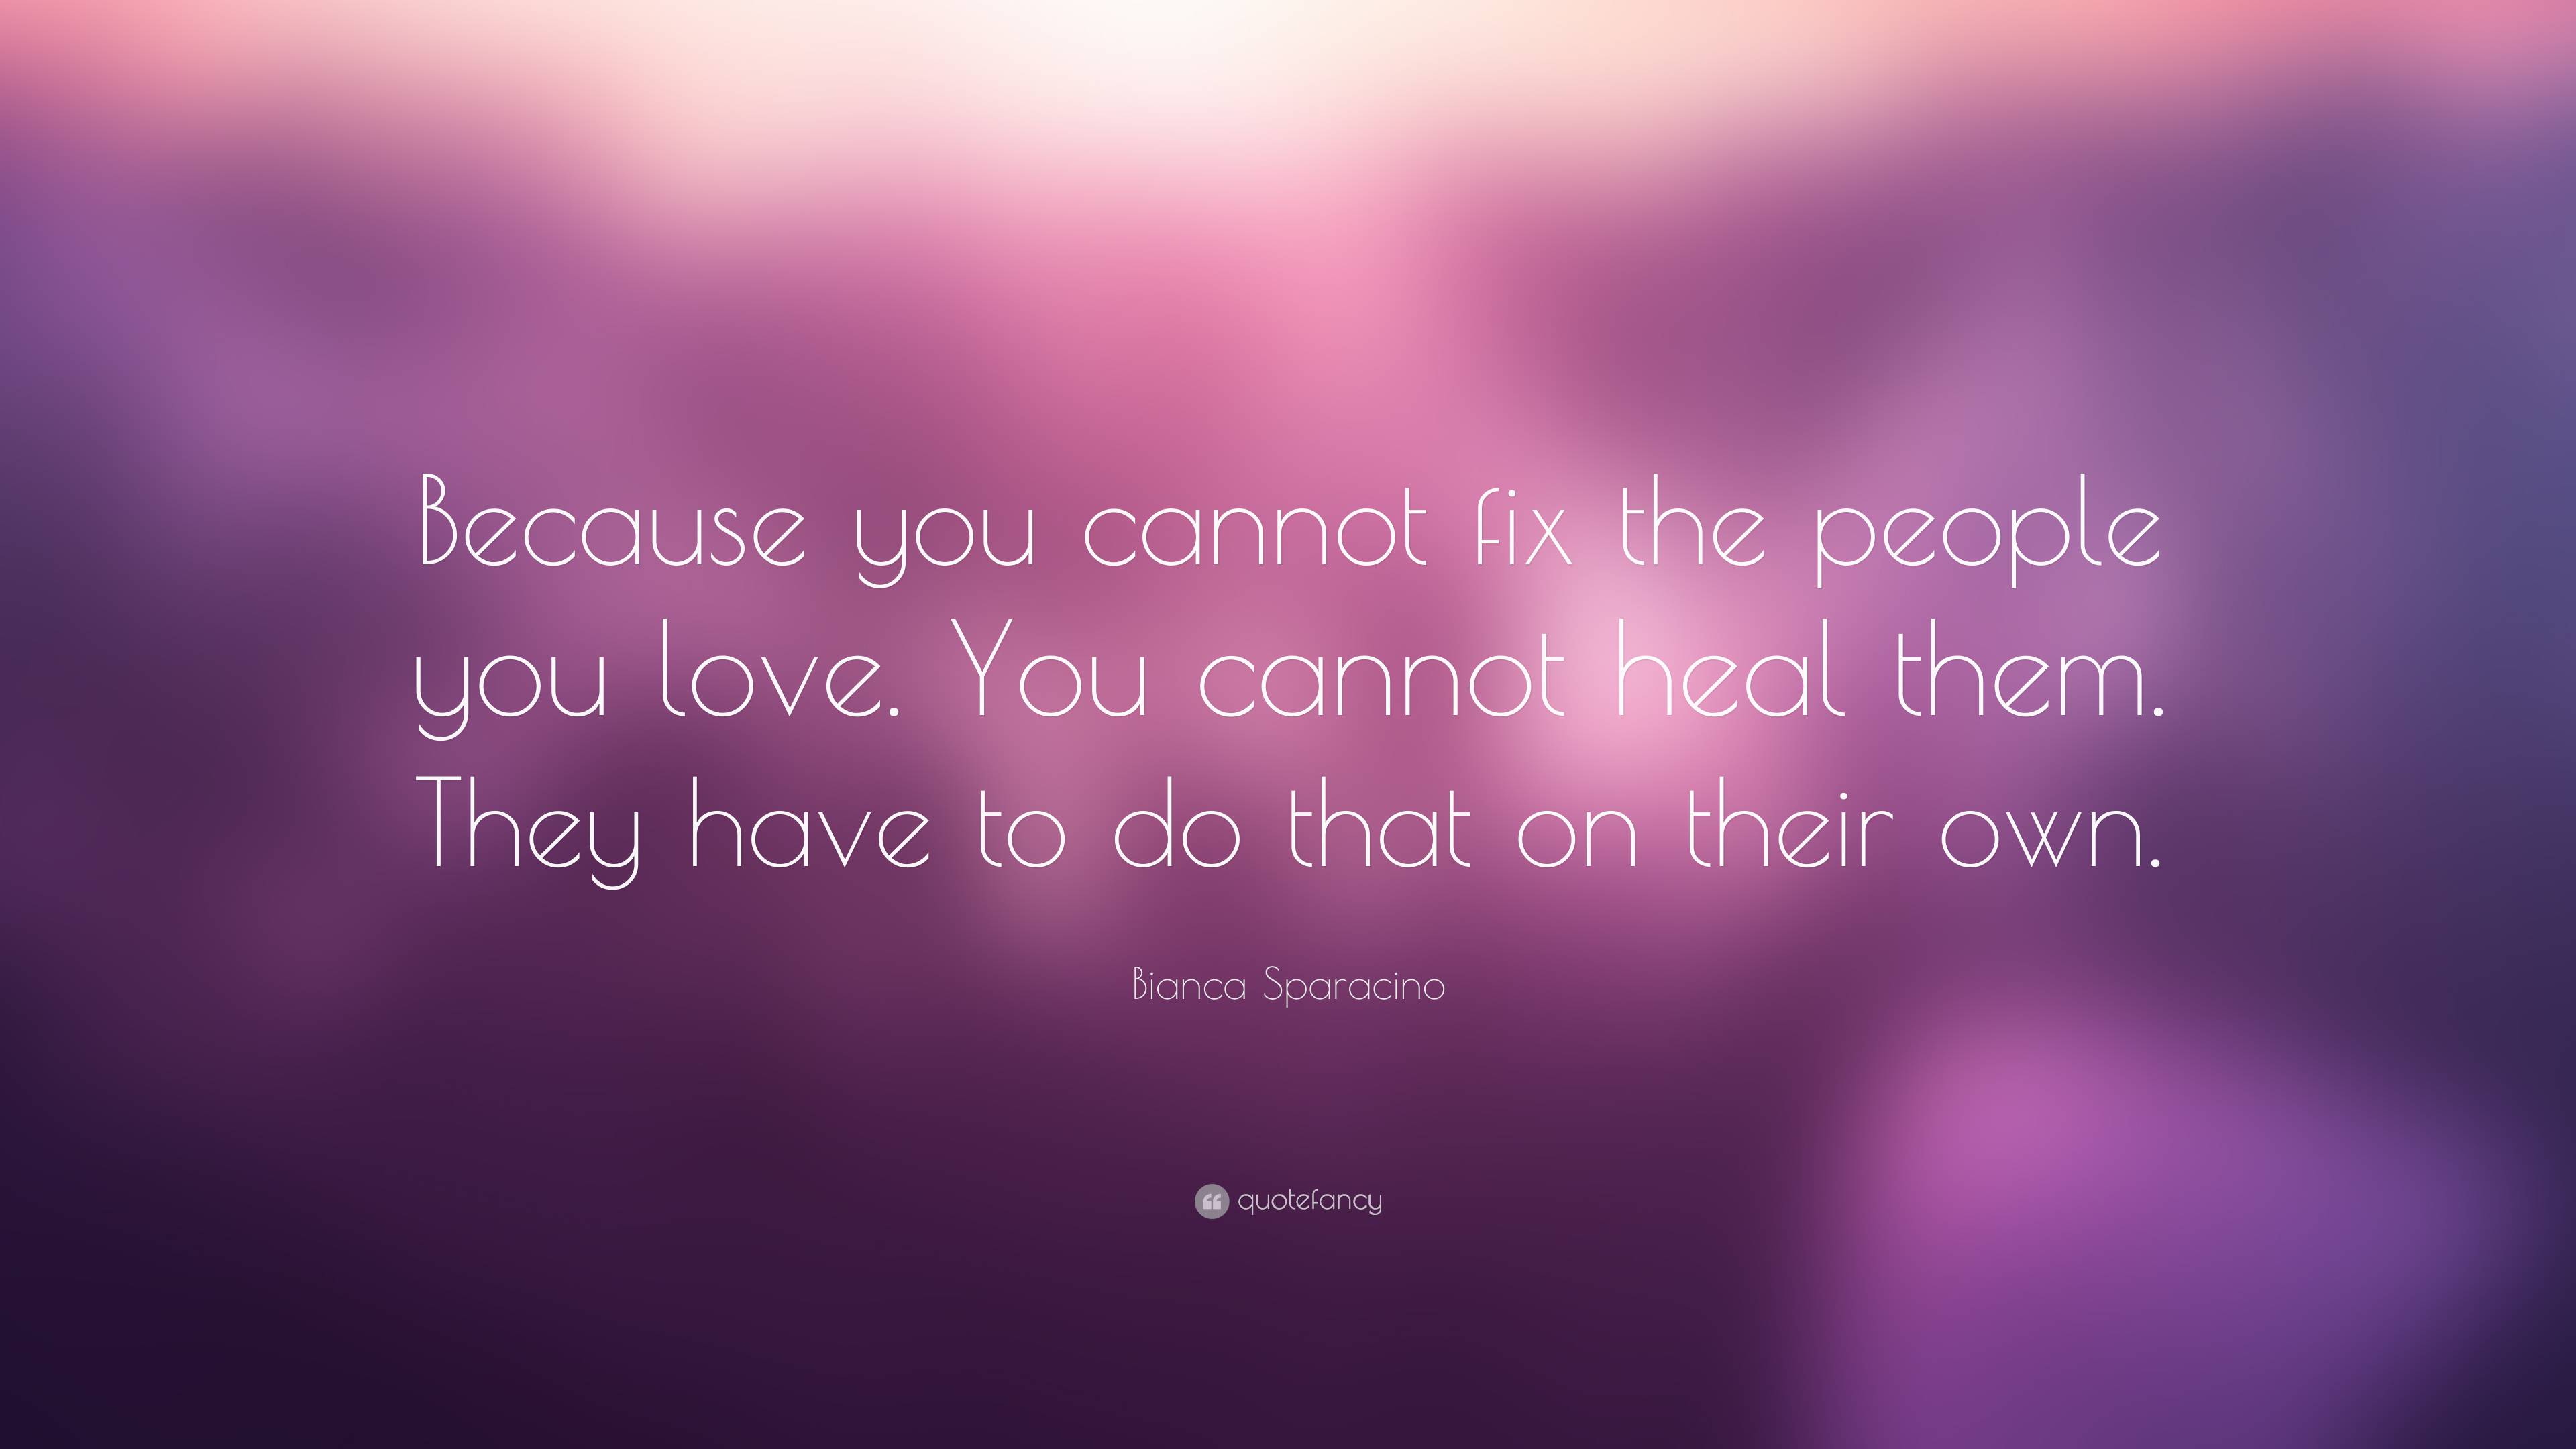 Bianca Sparacino Quote: “Because you cannot fix the people you love ...